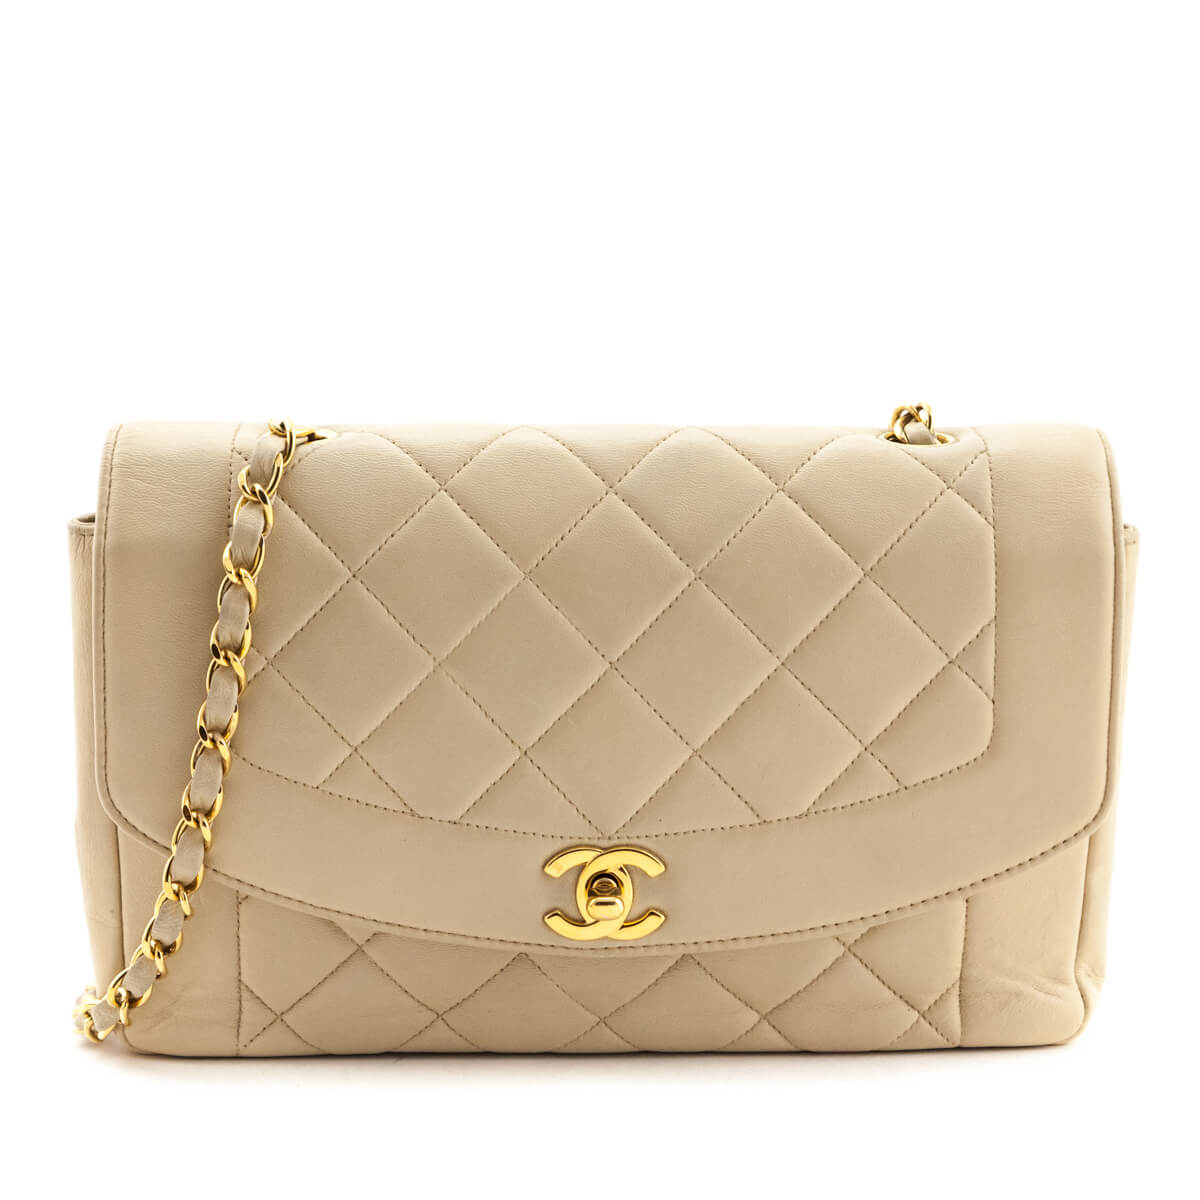 Chanel Beige Quilted Lambskin Small Diana Flap Bag - Love that Bag etc - Preowned Authentic Designer Handbags & Preloved Fashions